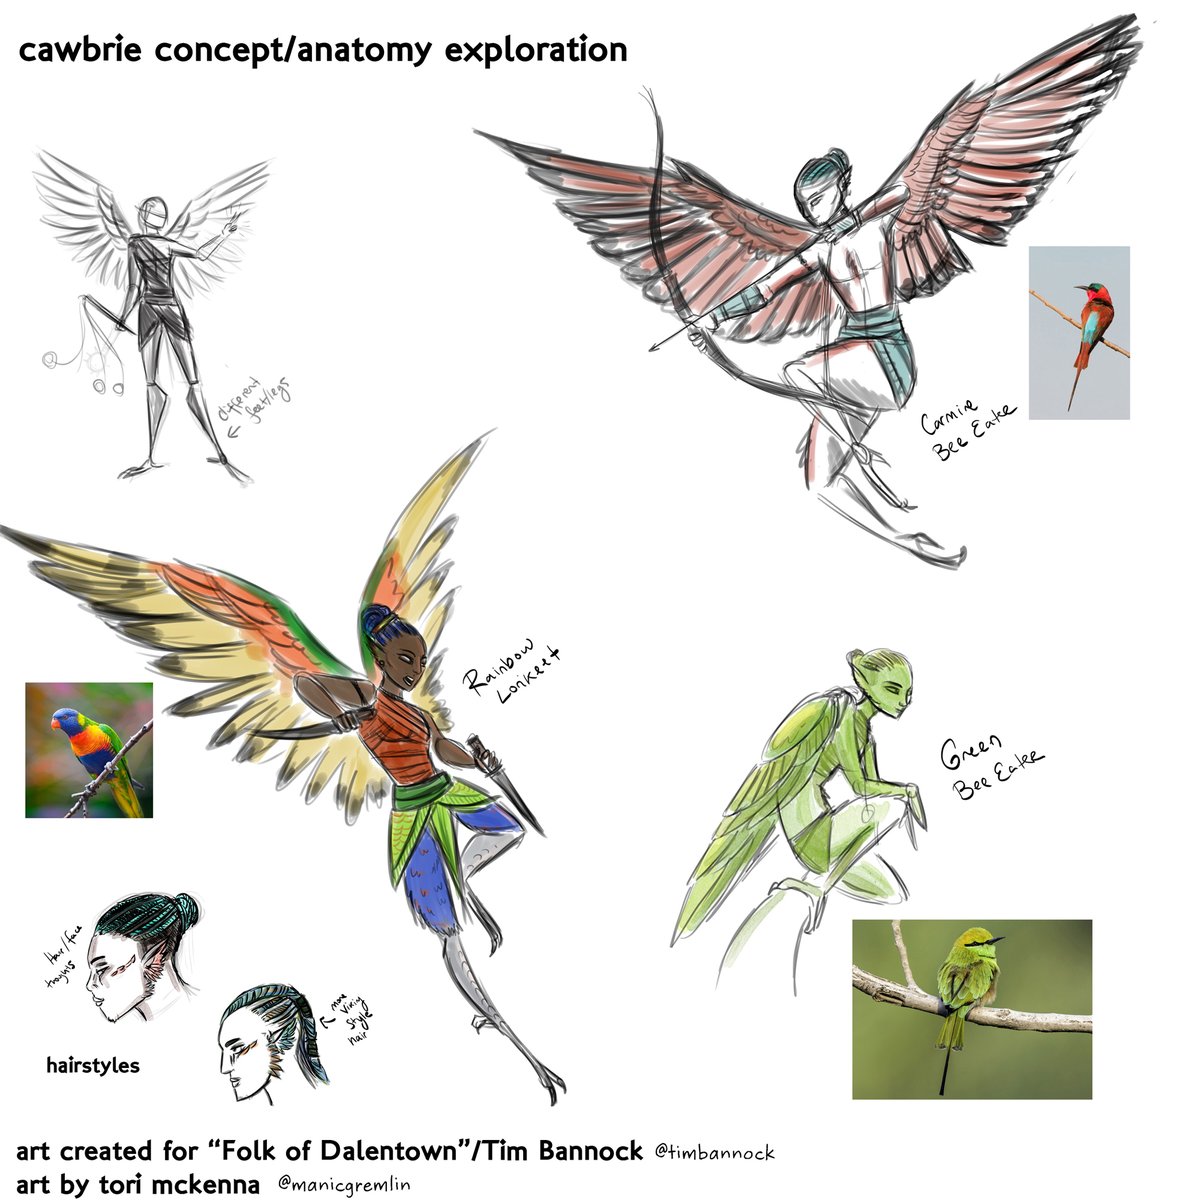 The cawbrie are the bird people and i gravitated to the concept immediately b/c I'm an ornithology nerd. There's supposed to be two variants of these which are based on their environment so I initially was looking at bird families that encompass several ecological niches